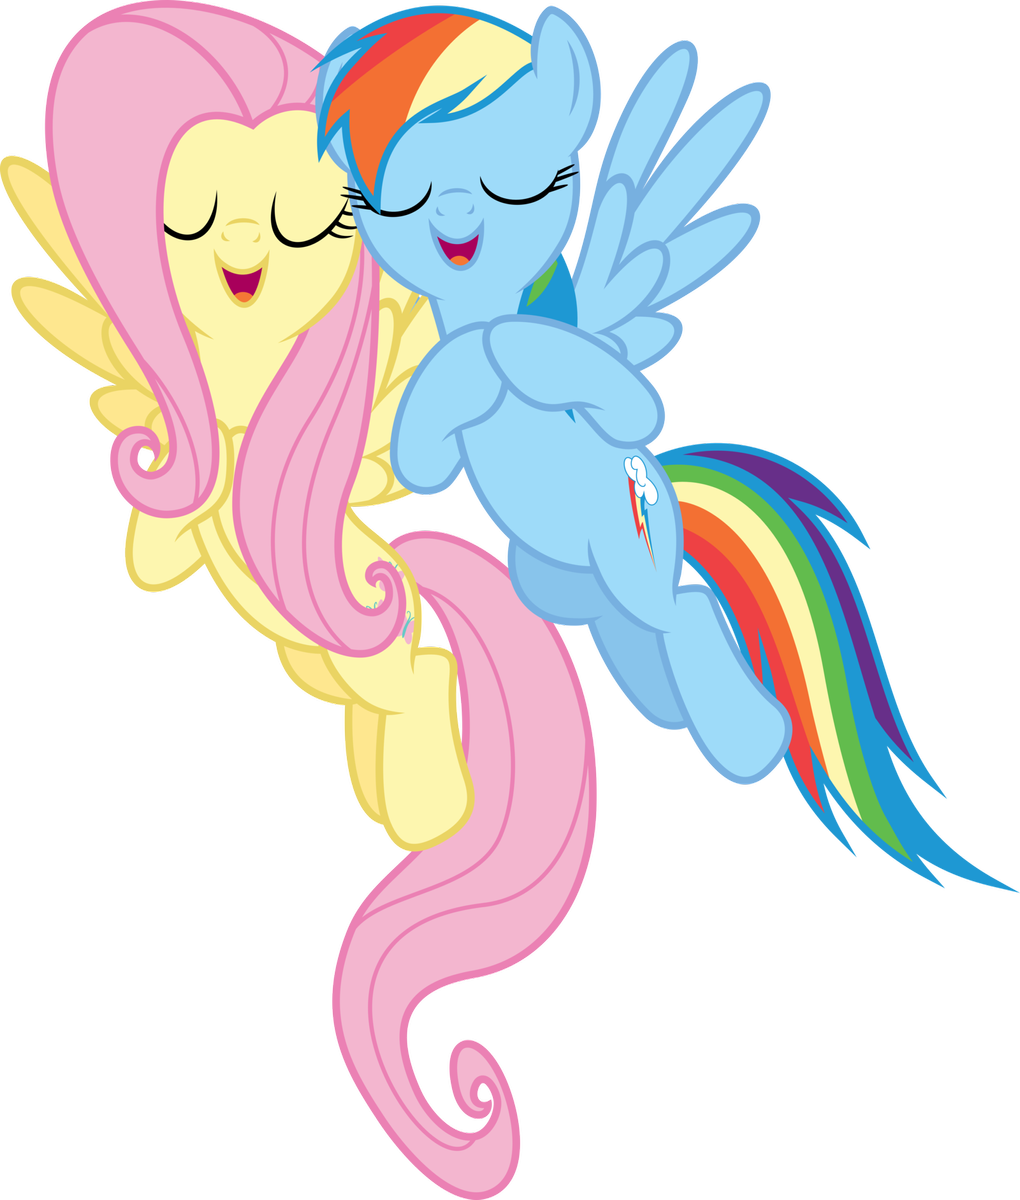 dashie and fluttershy by xpesifeindx-d5k